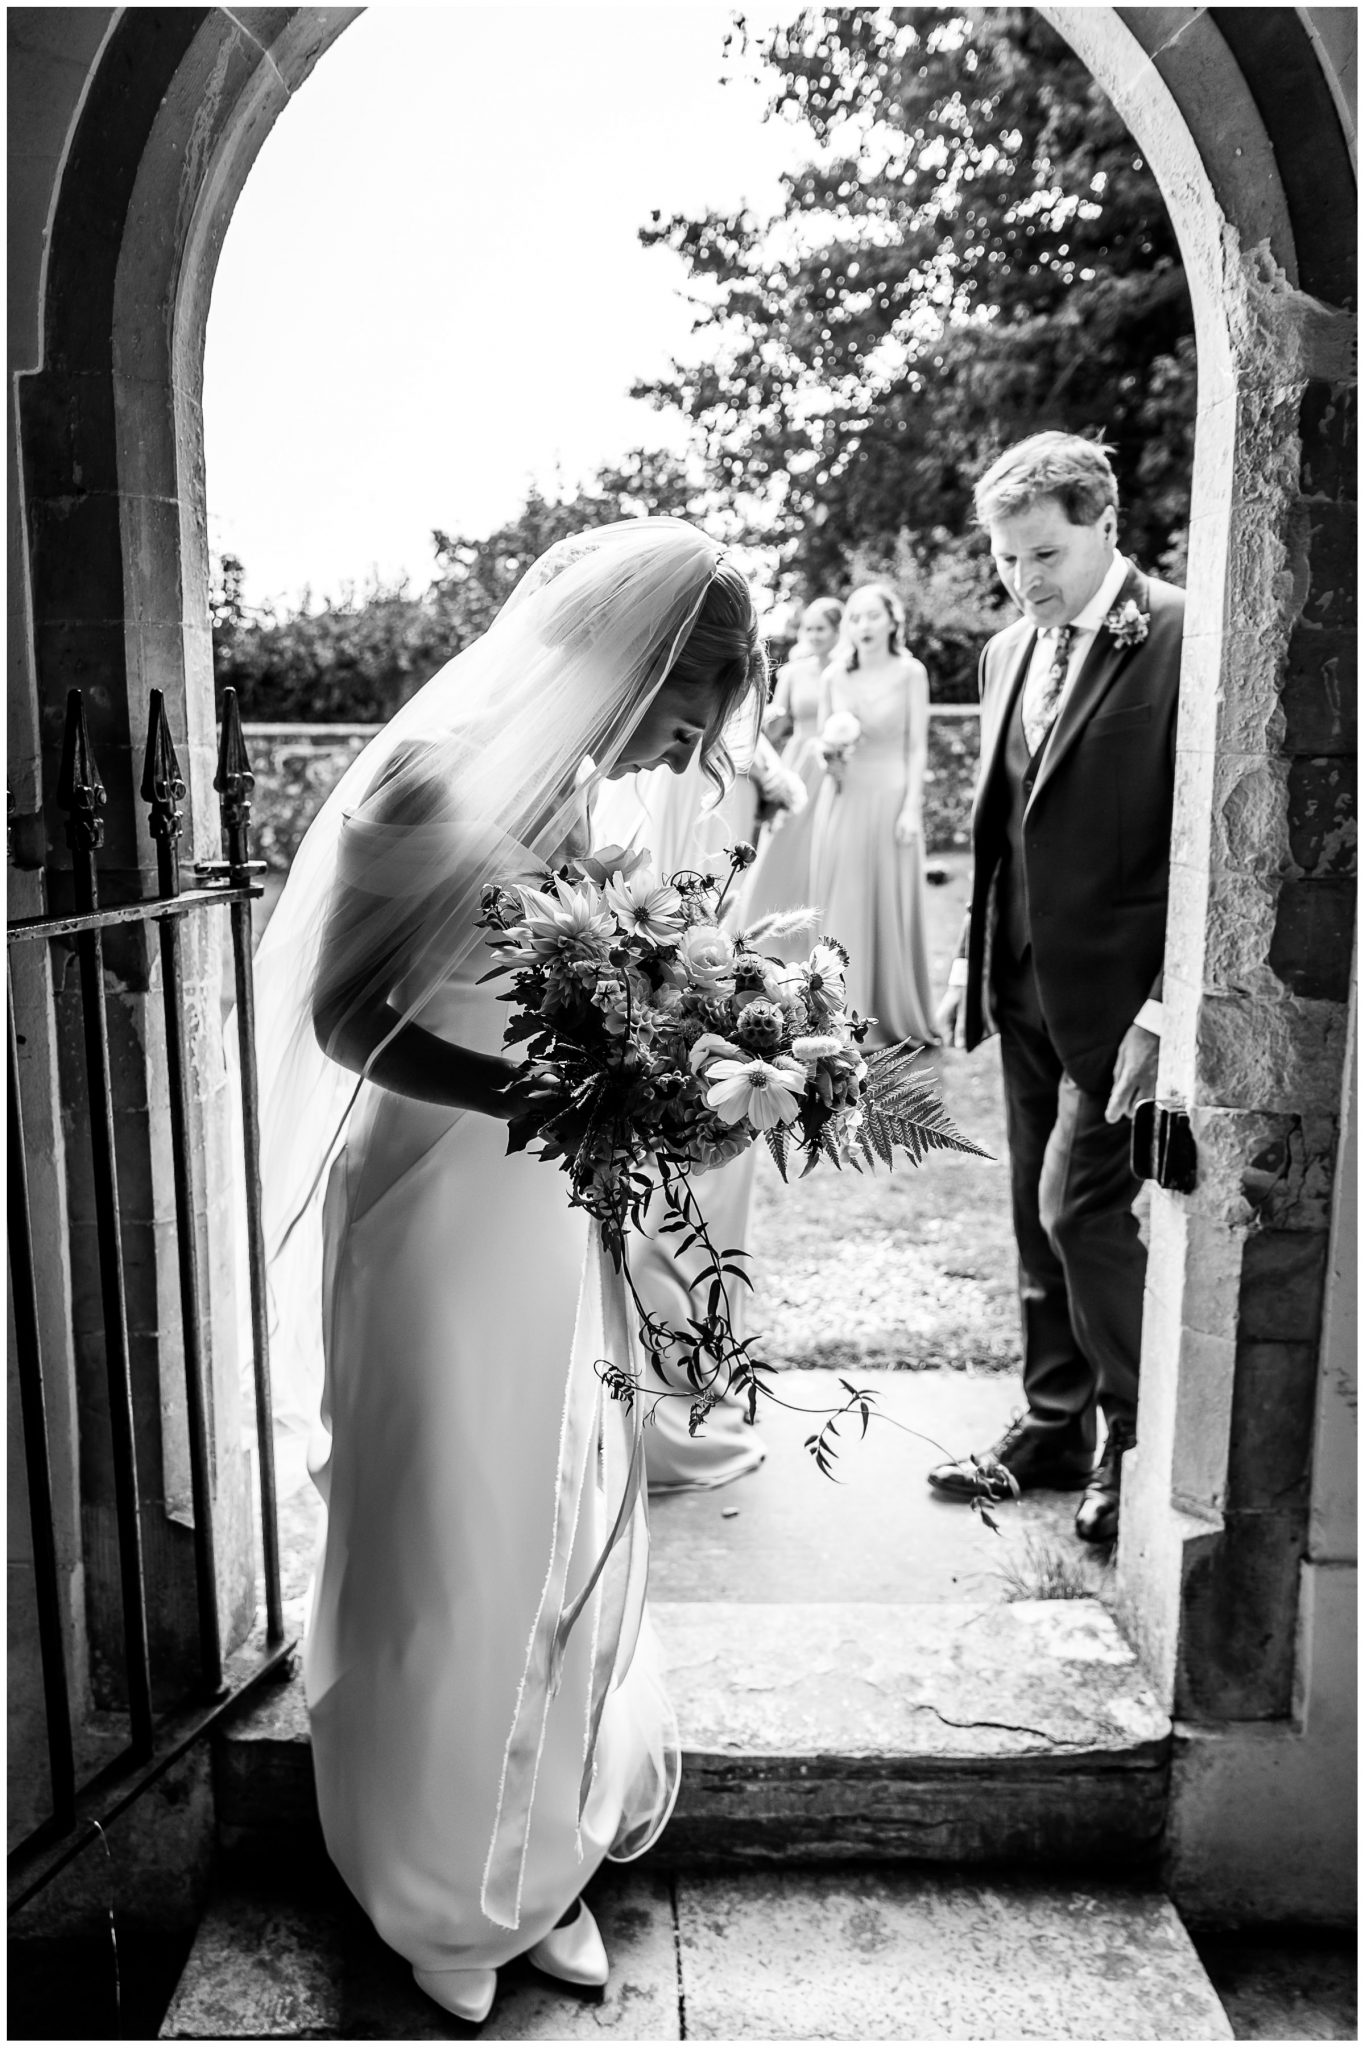 Black and white photograph of bride stood in the doorway to Droxford church, waiting to make her entrance